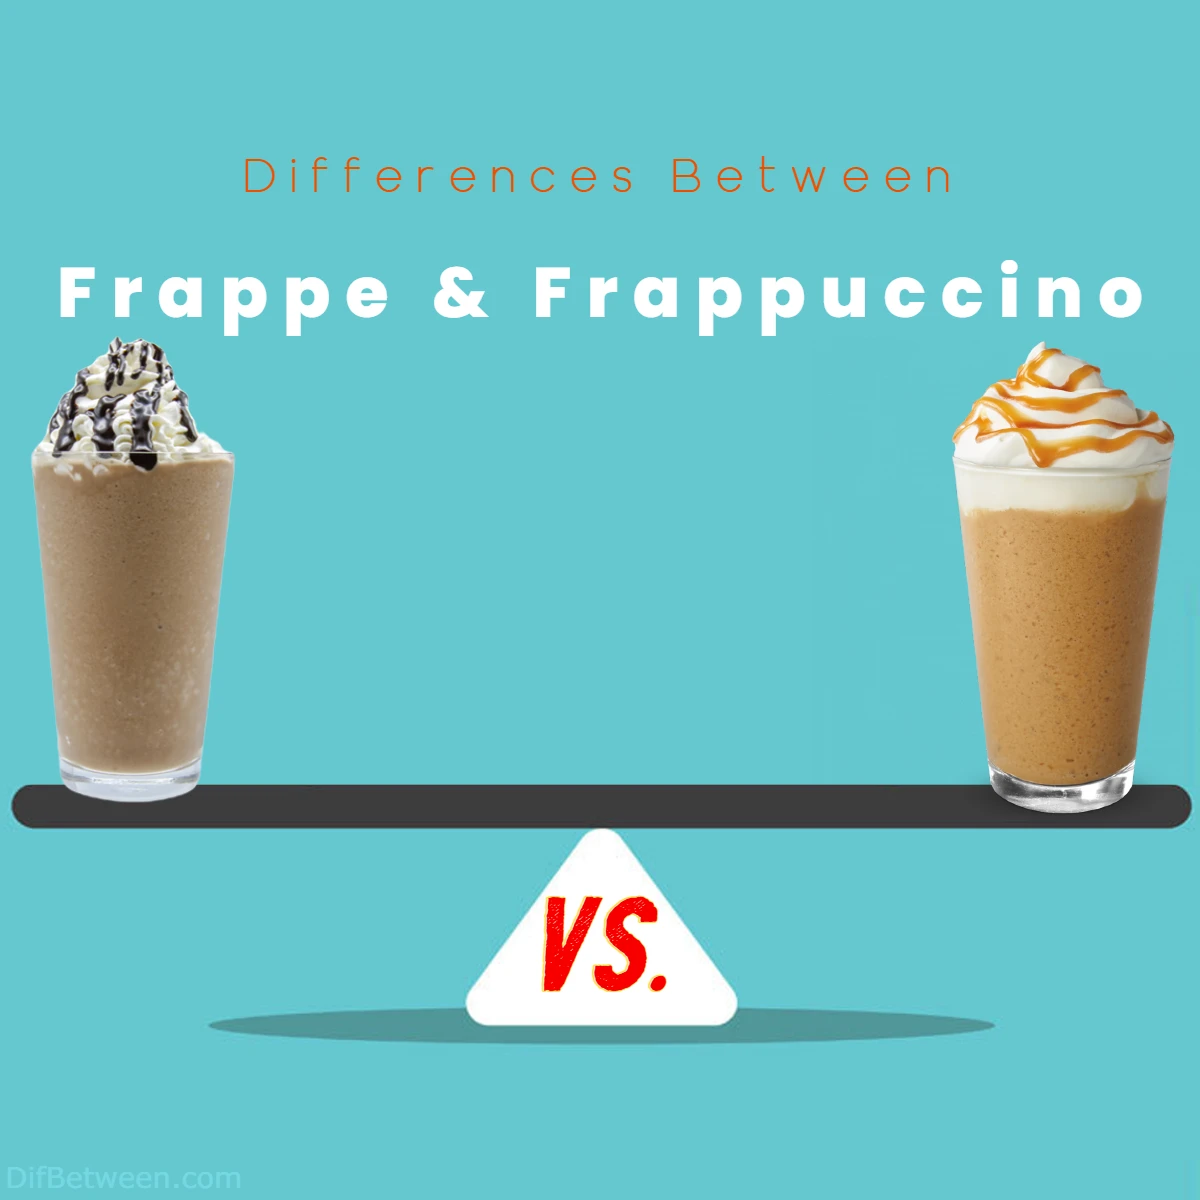 Differences Between Frappuccino and Frappe